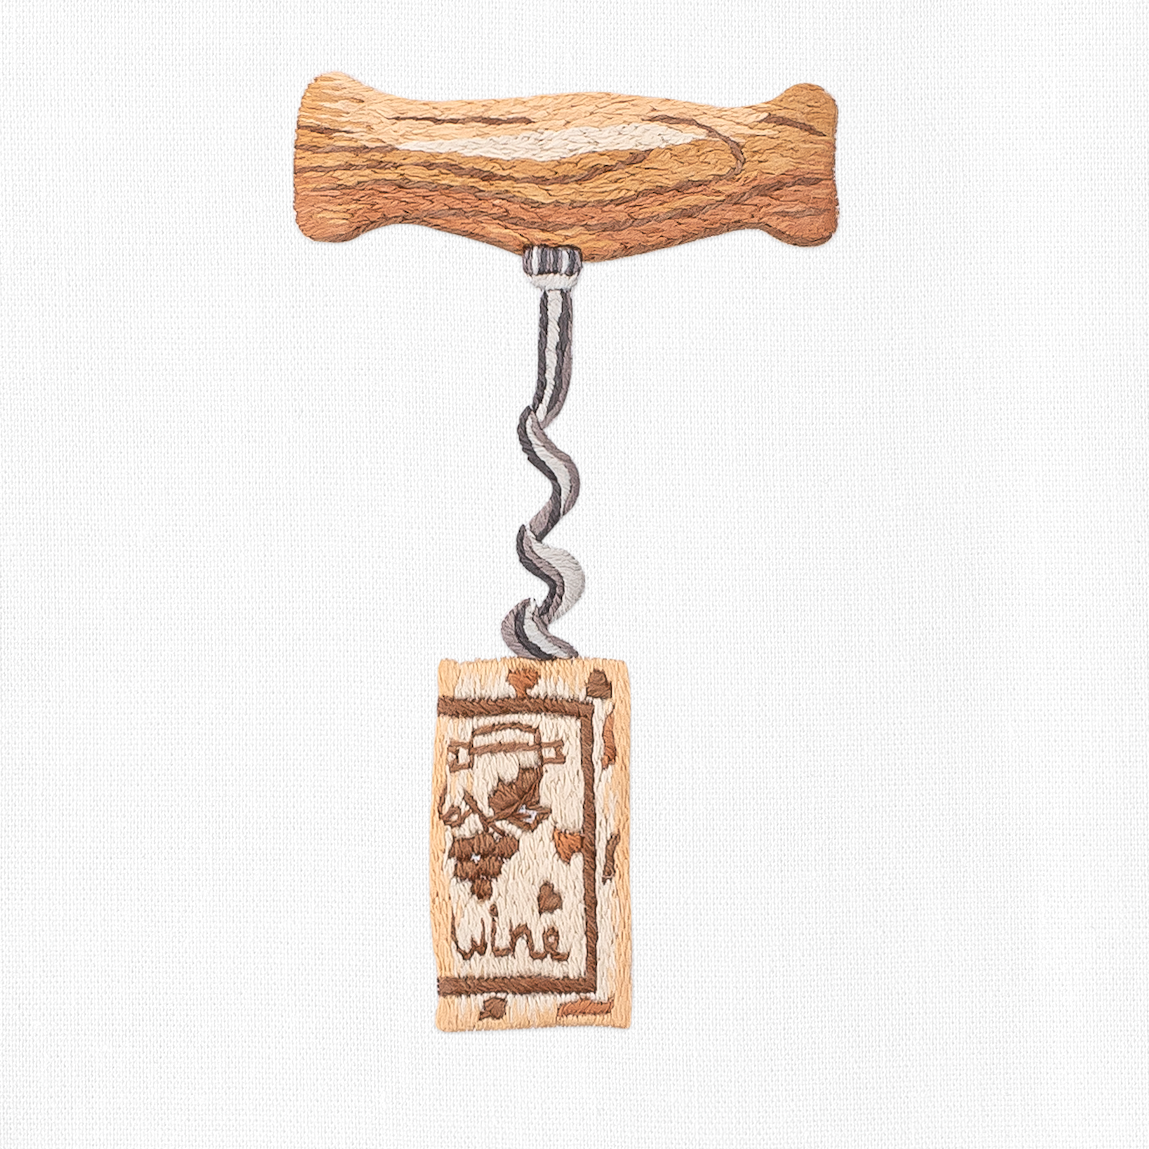 A close up detailed image of the embroidery - A silver corkscrew with a wooden handle twisted into a wine cork.